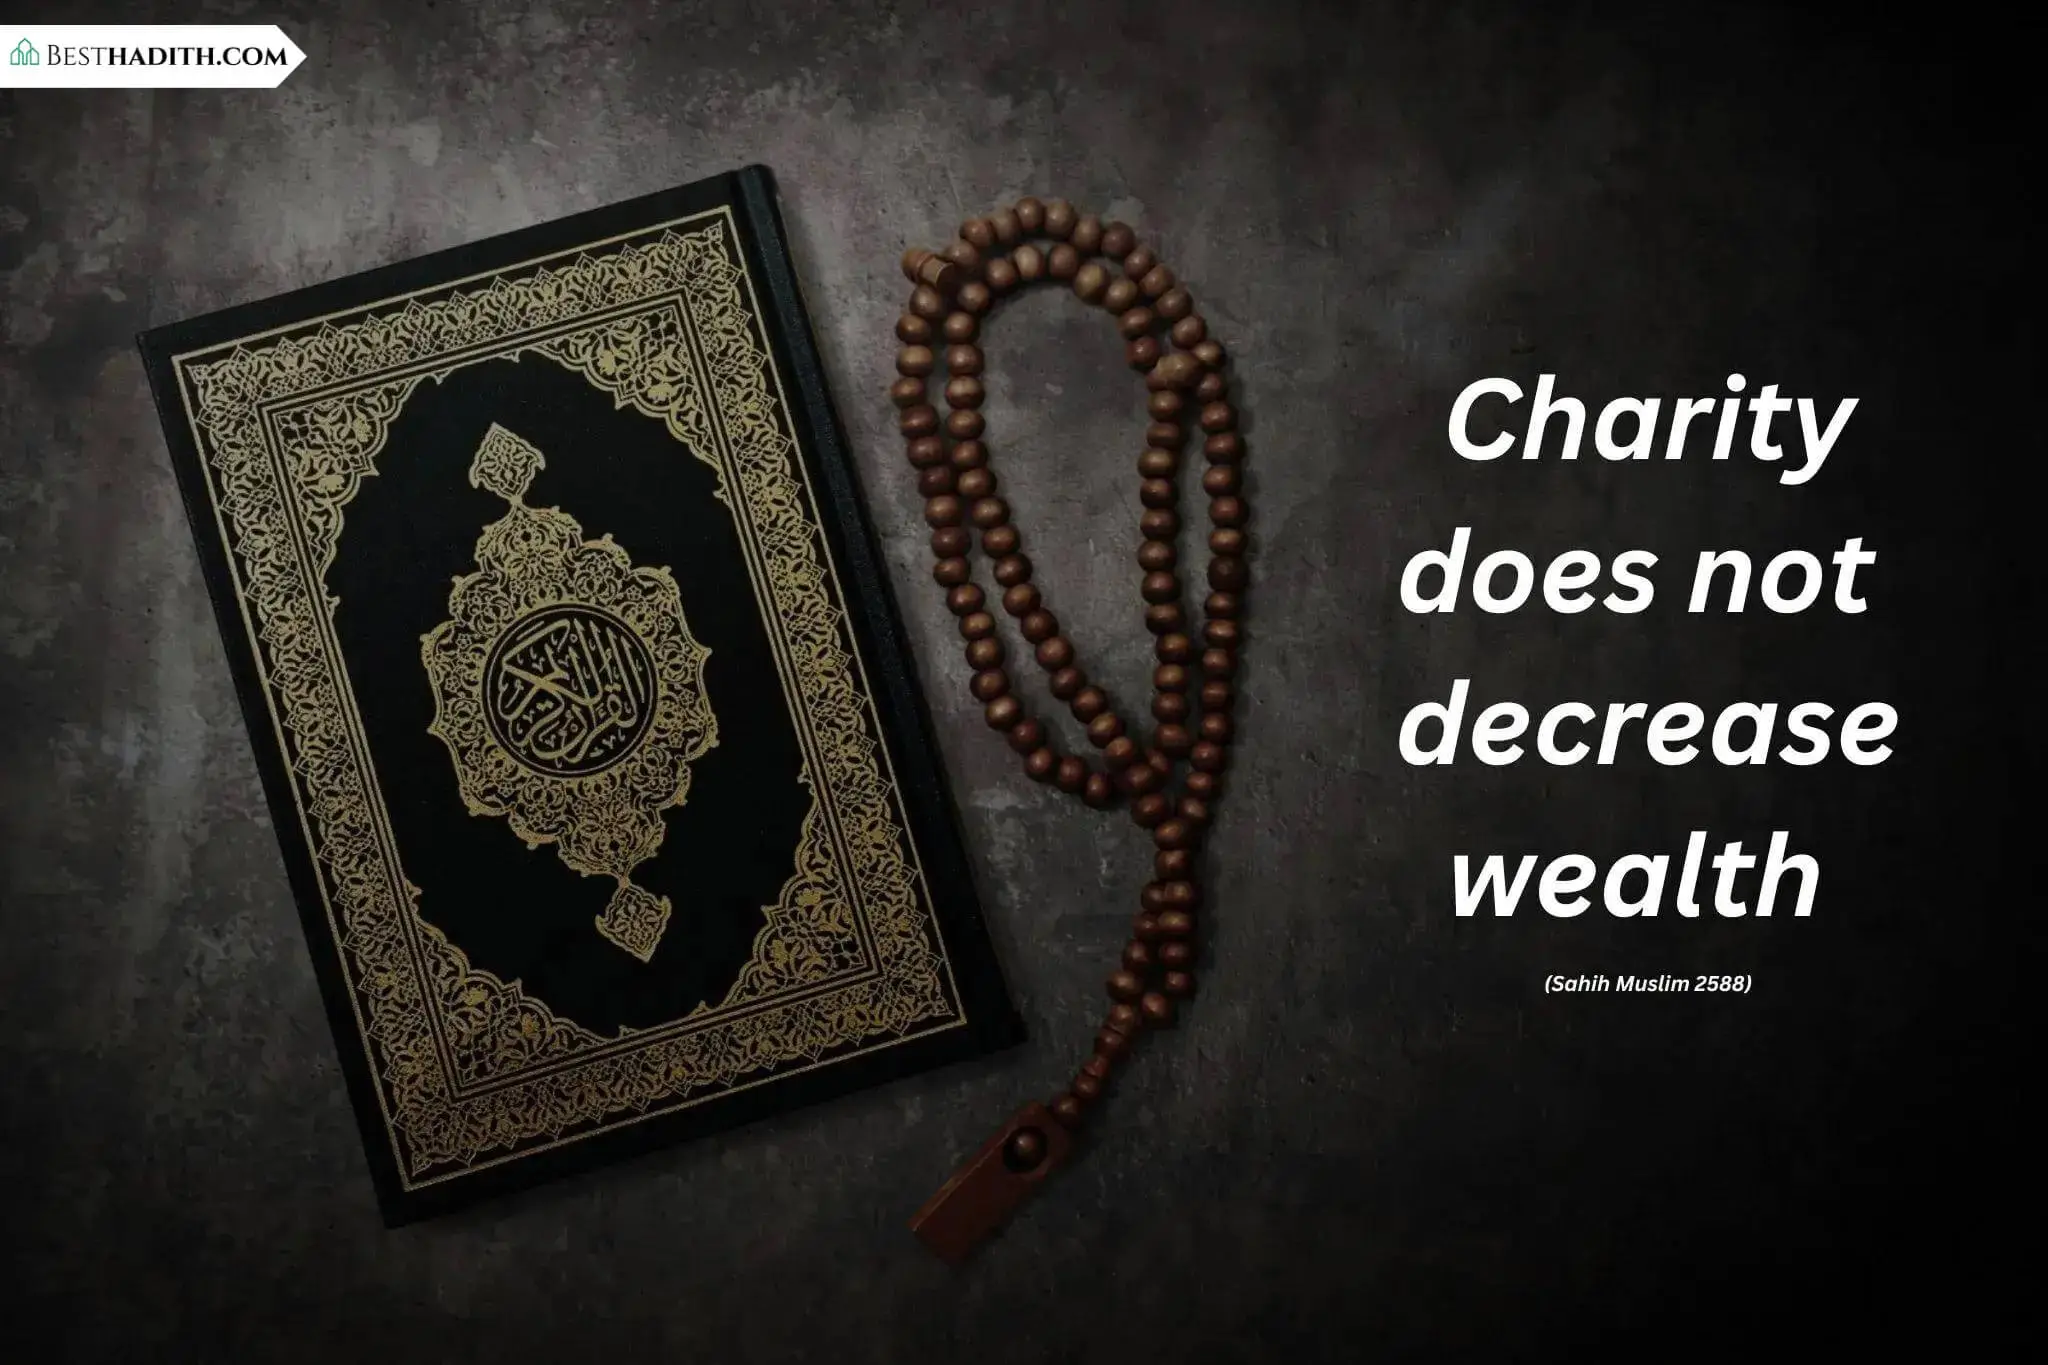 Allah says in the Quran about charity 